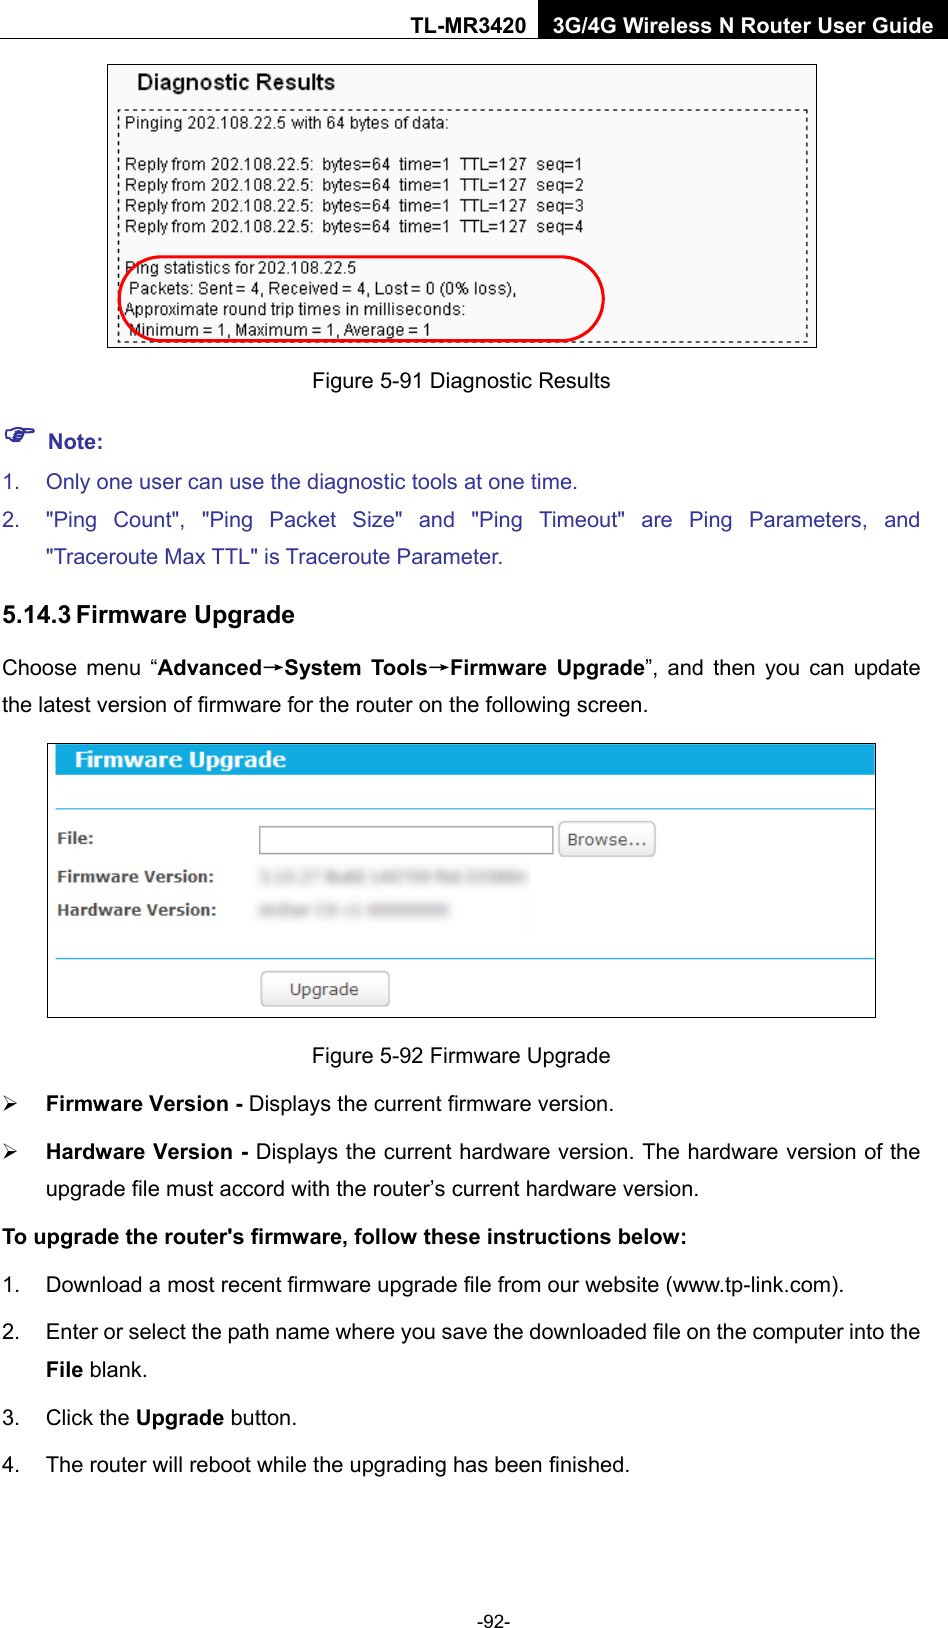    -92- TL-MR3420 3G/4G Wireless N Router User Guide  Figure 5-91 Diagnostic Results  Note: 1. Only one user can use the diagnostic tools at one time.   2. &quot;Ping Count&quot;, &quot;Ping Packet Size&quot; and &quot;Ping Timeout&quot; are Ping Parameters, and &quot;Traceroute Max TTL&quot; is Traceroute Parameter.   5.14.3 Firmware Upgrade Choose menu “Advanced→System Tools→Firmware Upgrade”, and then you can update the latest version of firmware for the router on the following screen.  Figure 5-92 Firmware Upgrade  Firmware Version - Displays the current firmware version.  Hardware Version - Displays the current hardware version. The hardware version of the upgrade file must accord with the router’s current hardware version. To upgrade the router&apos;s firmware, follow these instructions below: 1. Download a most recent firmware upgrade file from our website (www.tp-link.com).   2. Enter or select the path name where you save the downloaded file on the computer into the File blank.   3. Click the Upgrade button.   4. The router will reboot while the upgrading has been finished.   